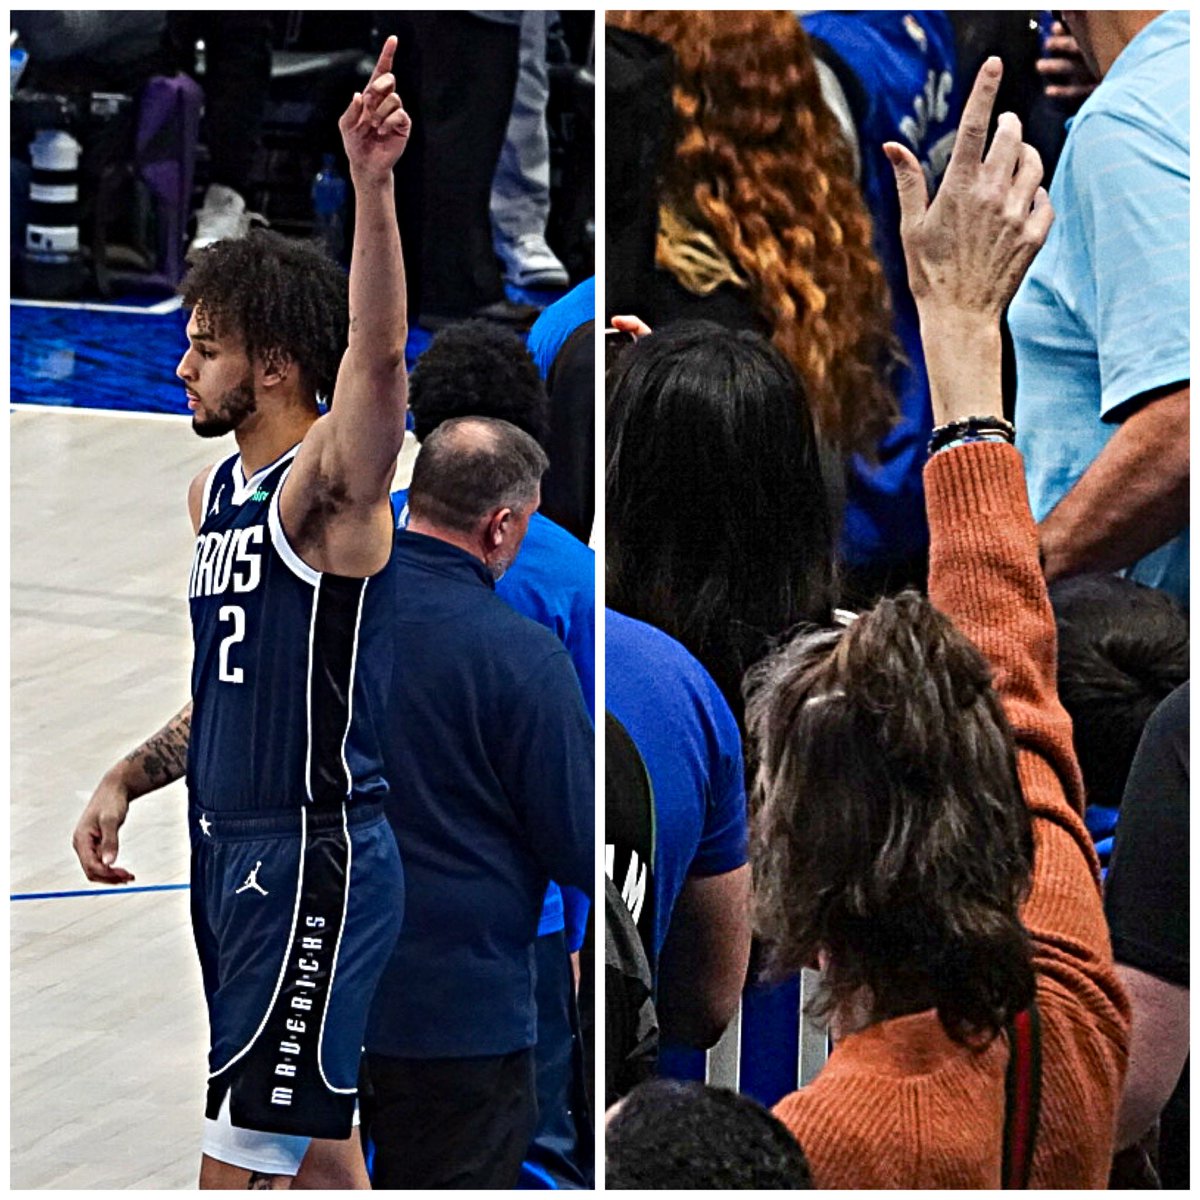 Dereck Lively II announced the passing of his mother Kathy Drysdale today. She was the sweetest person, every time you saw Dereck off the court she was right there with him. Their bond was beautiful as she was so happy for her son. My prayers go out to him and his family.